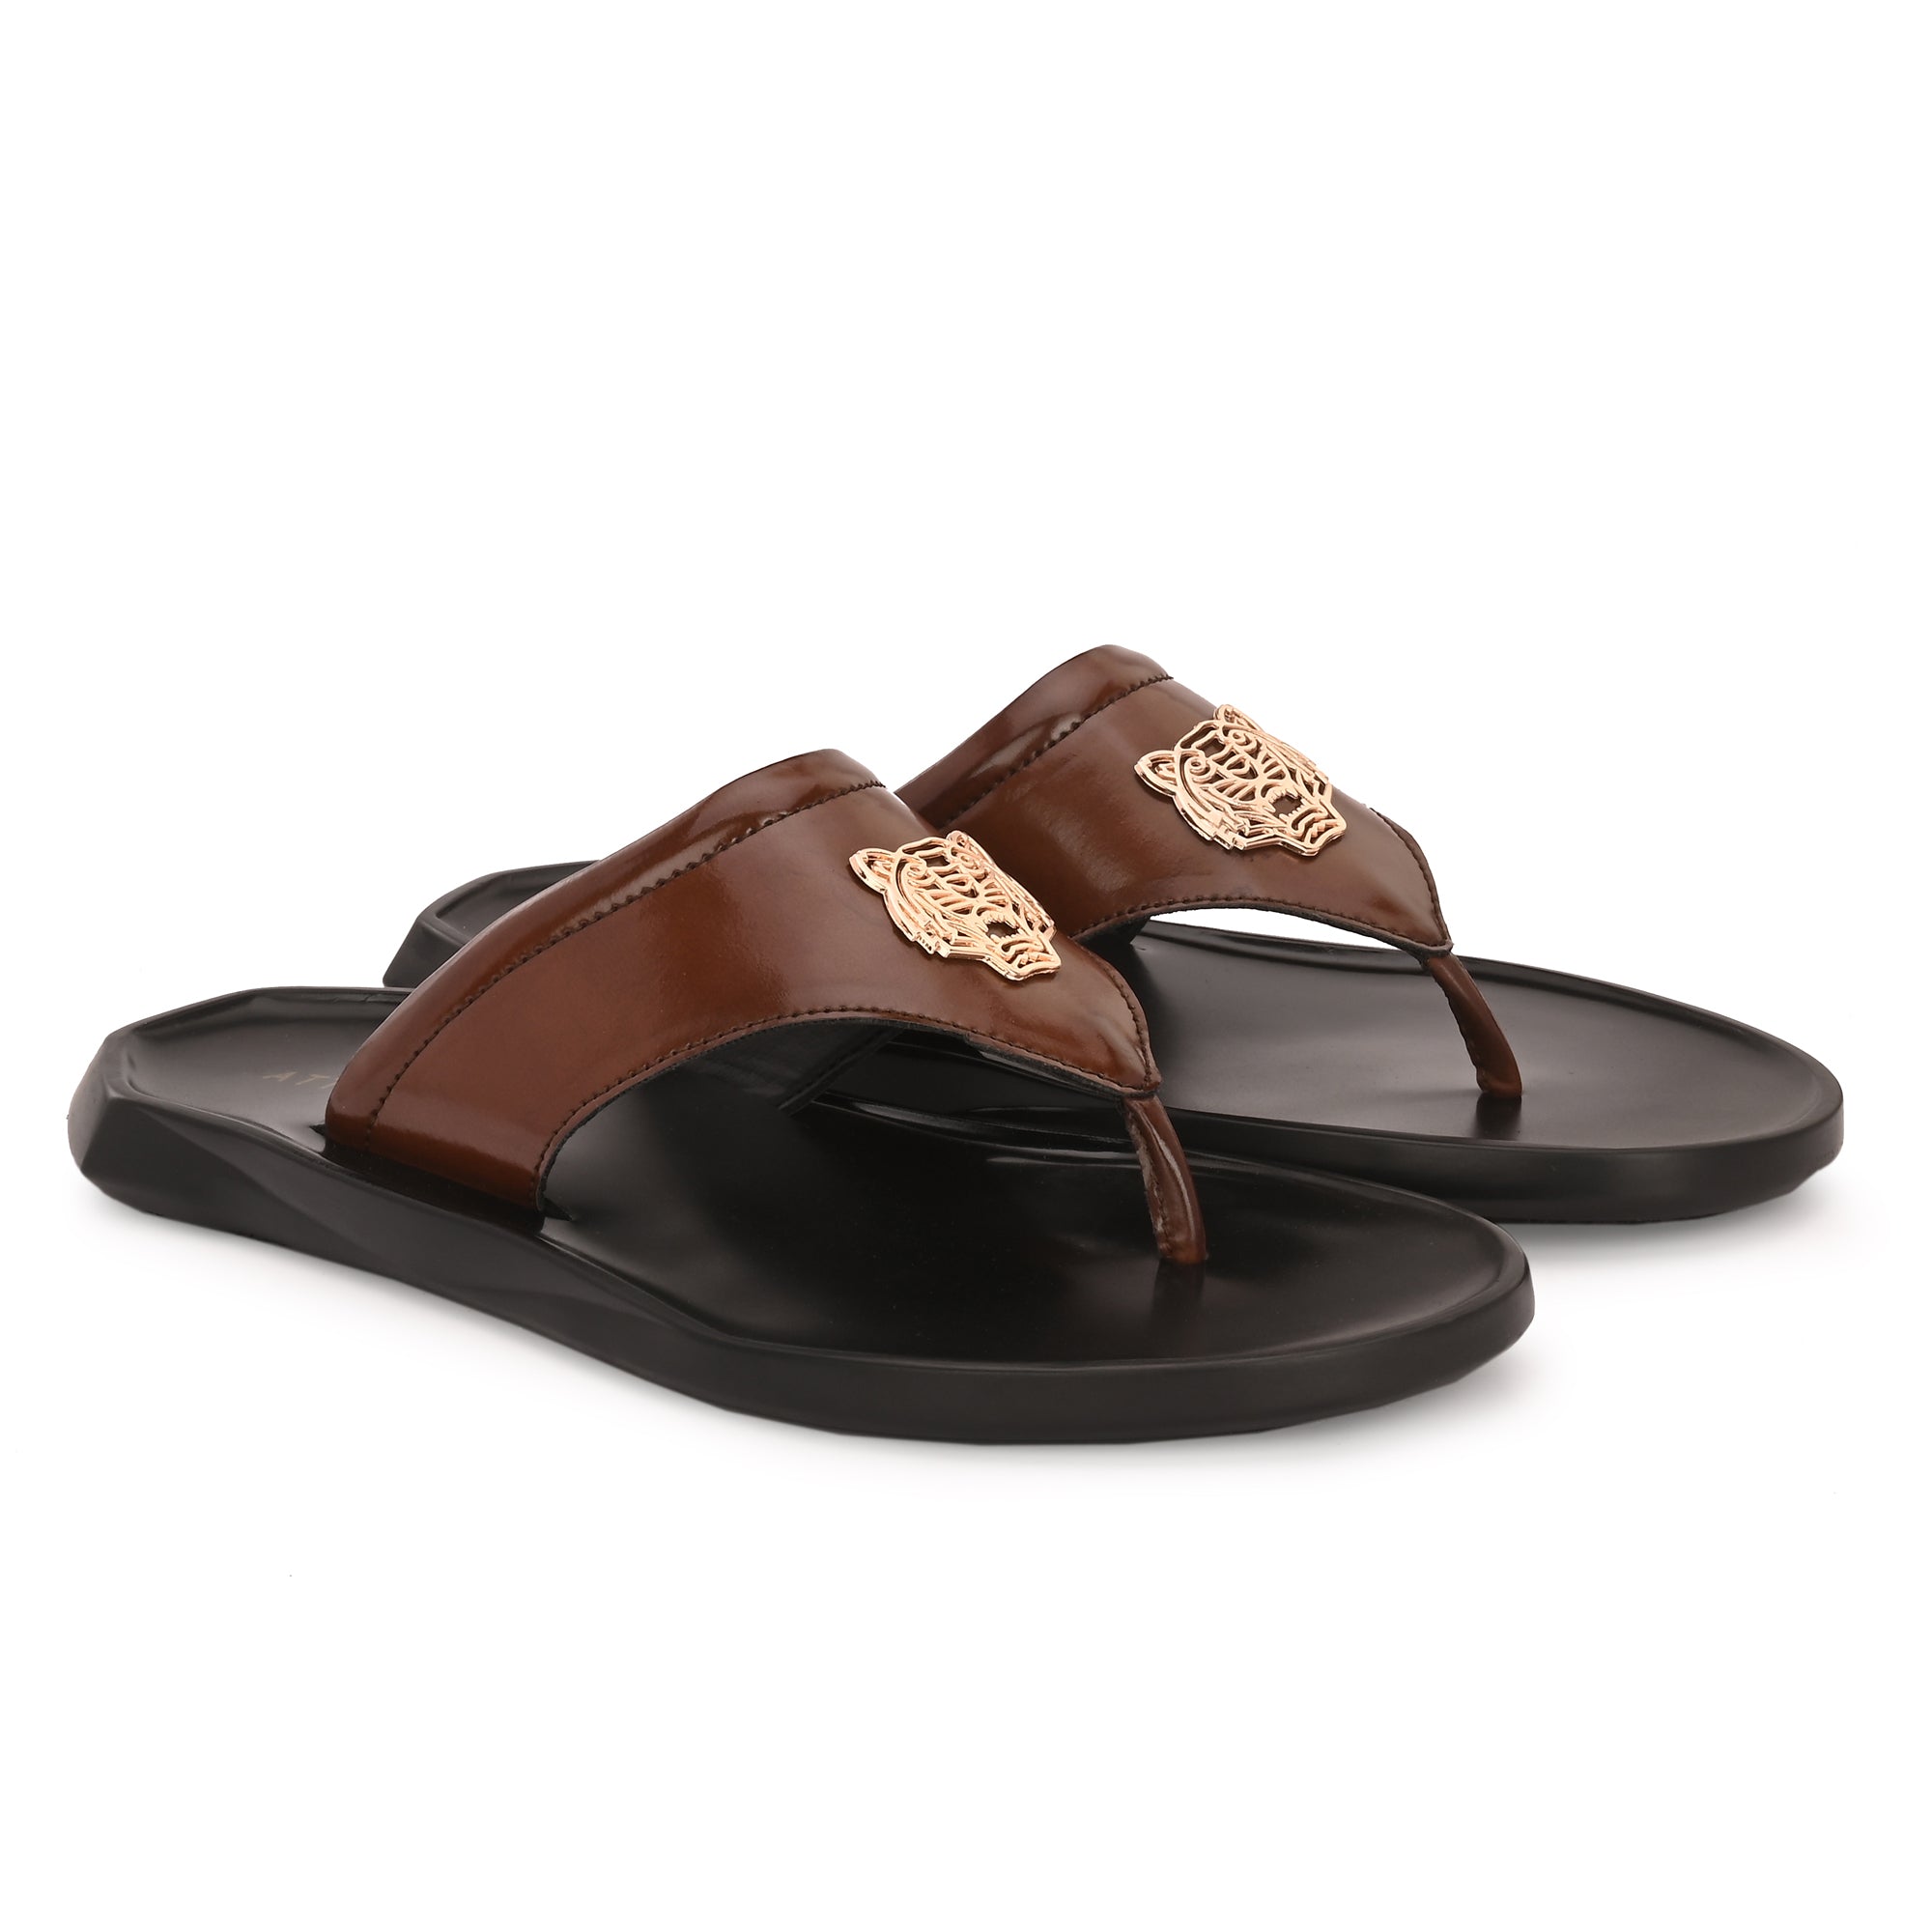 attitudist-brown-thong-slippers-for-men-with-tiger-brooch